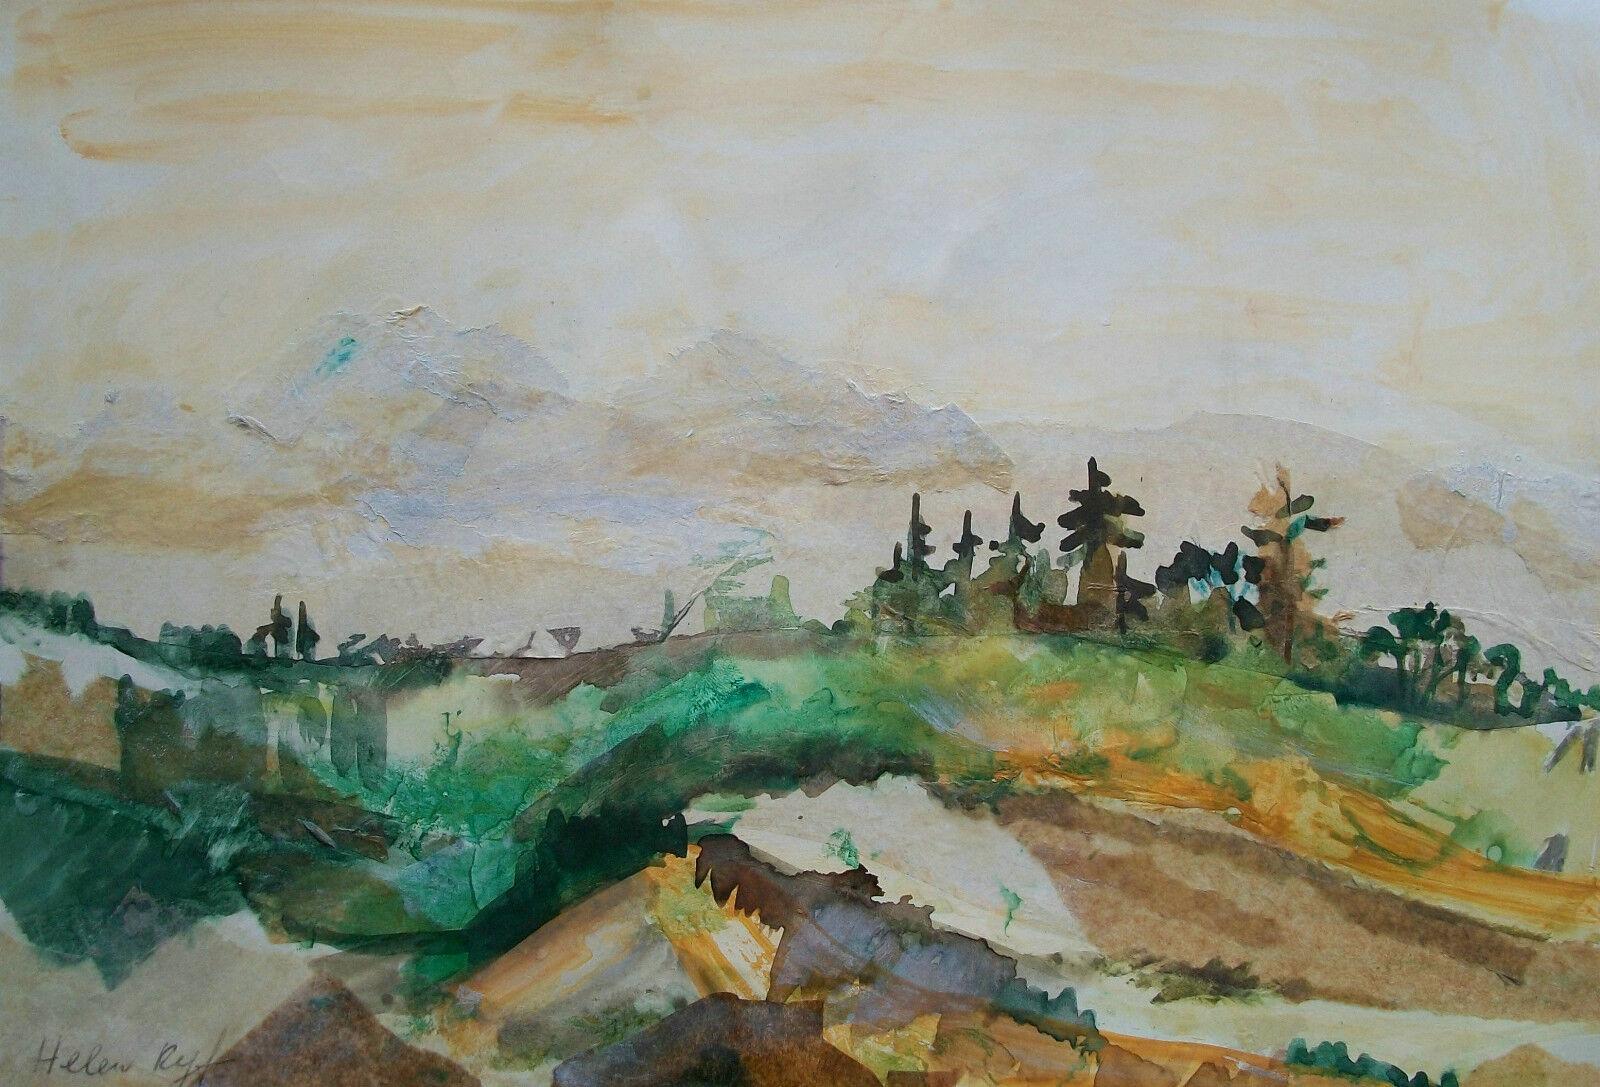 HELEN RYF - French Canadian mixed media/collage landscape painting on paper - untitled - unframed - signed lower left - Canada - circa 1990.

Good vintage condition - over-all fading - no loss - no restoration - ready to frame.

Size - 14